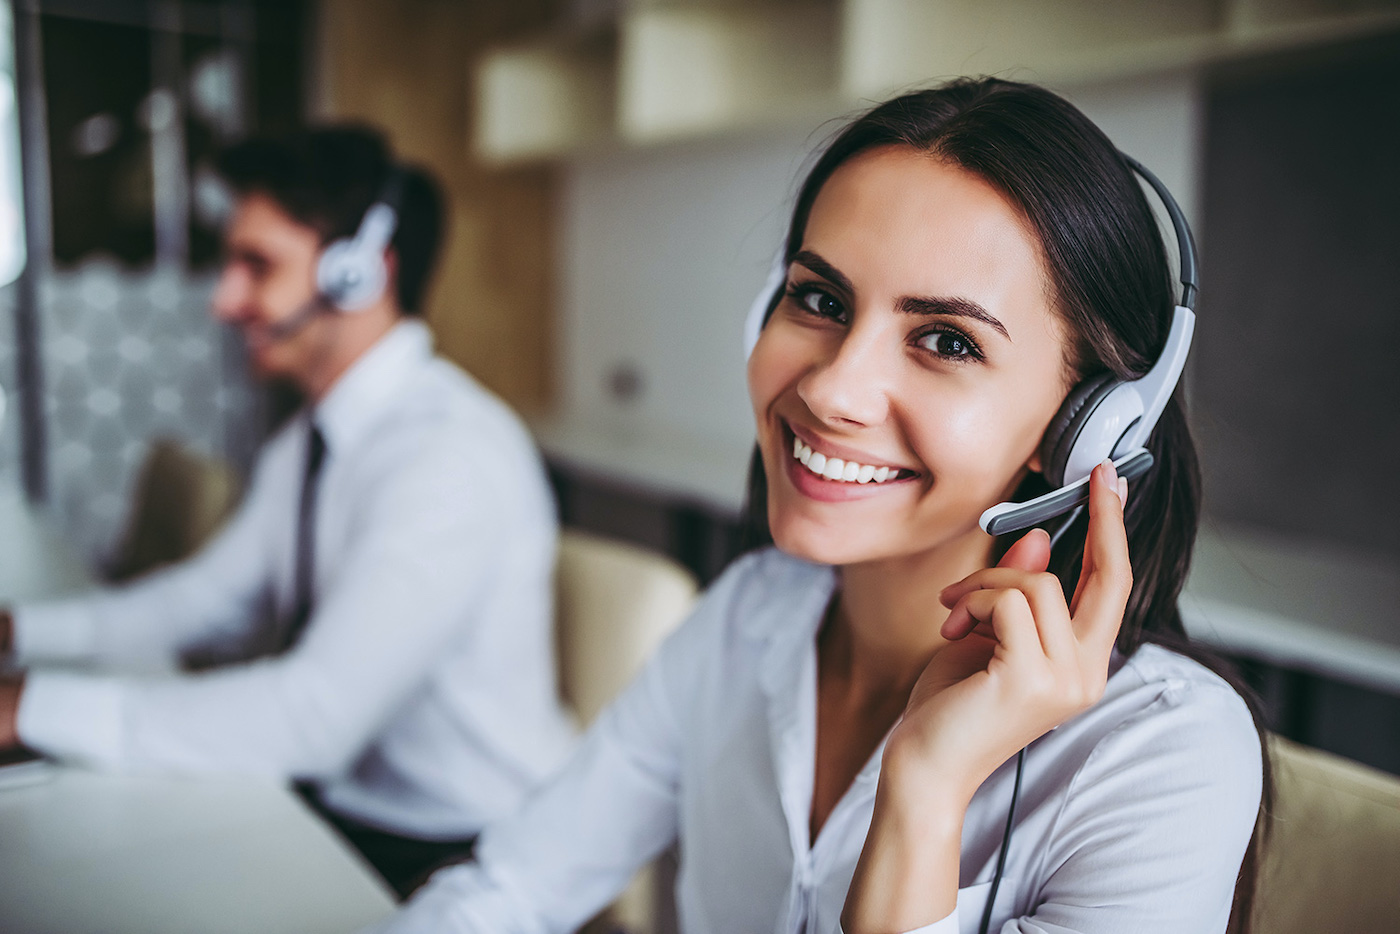 B2B cold calling presents unique challenges for sales professionals, from navigating gatekeepers and rejection to overcoming objections and building rapport.